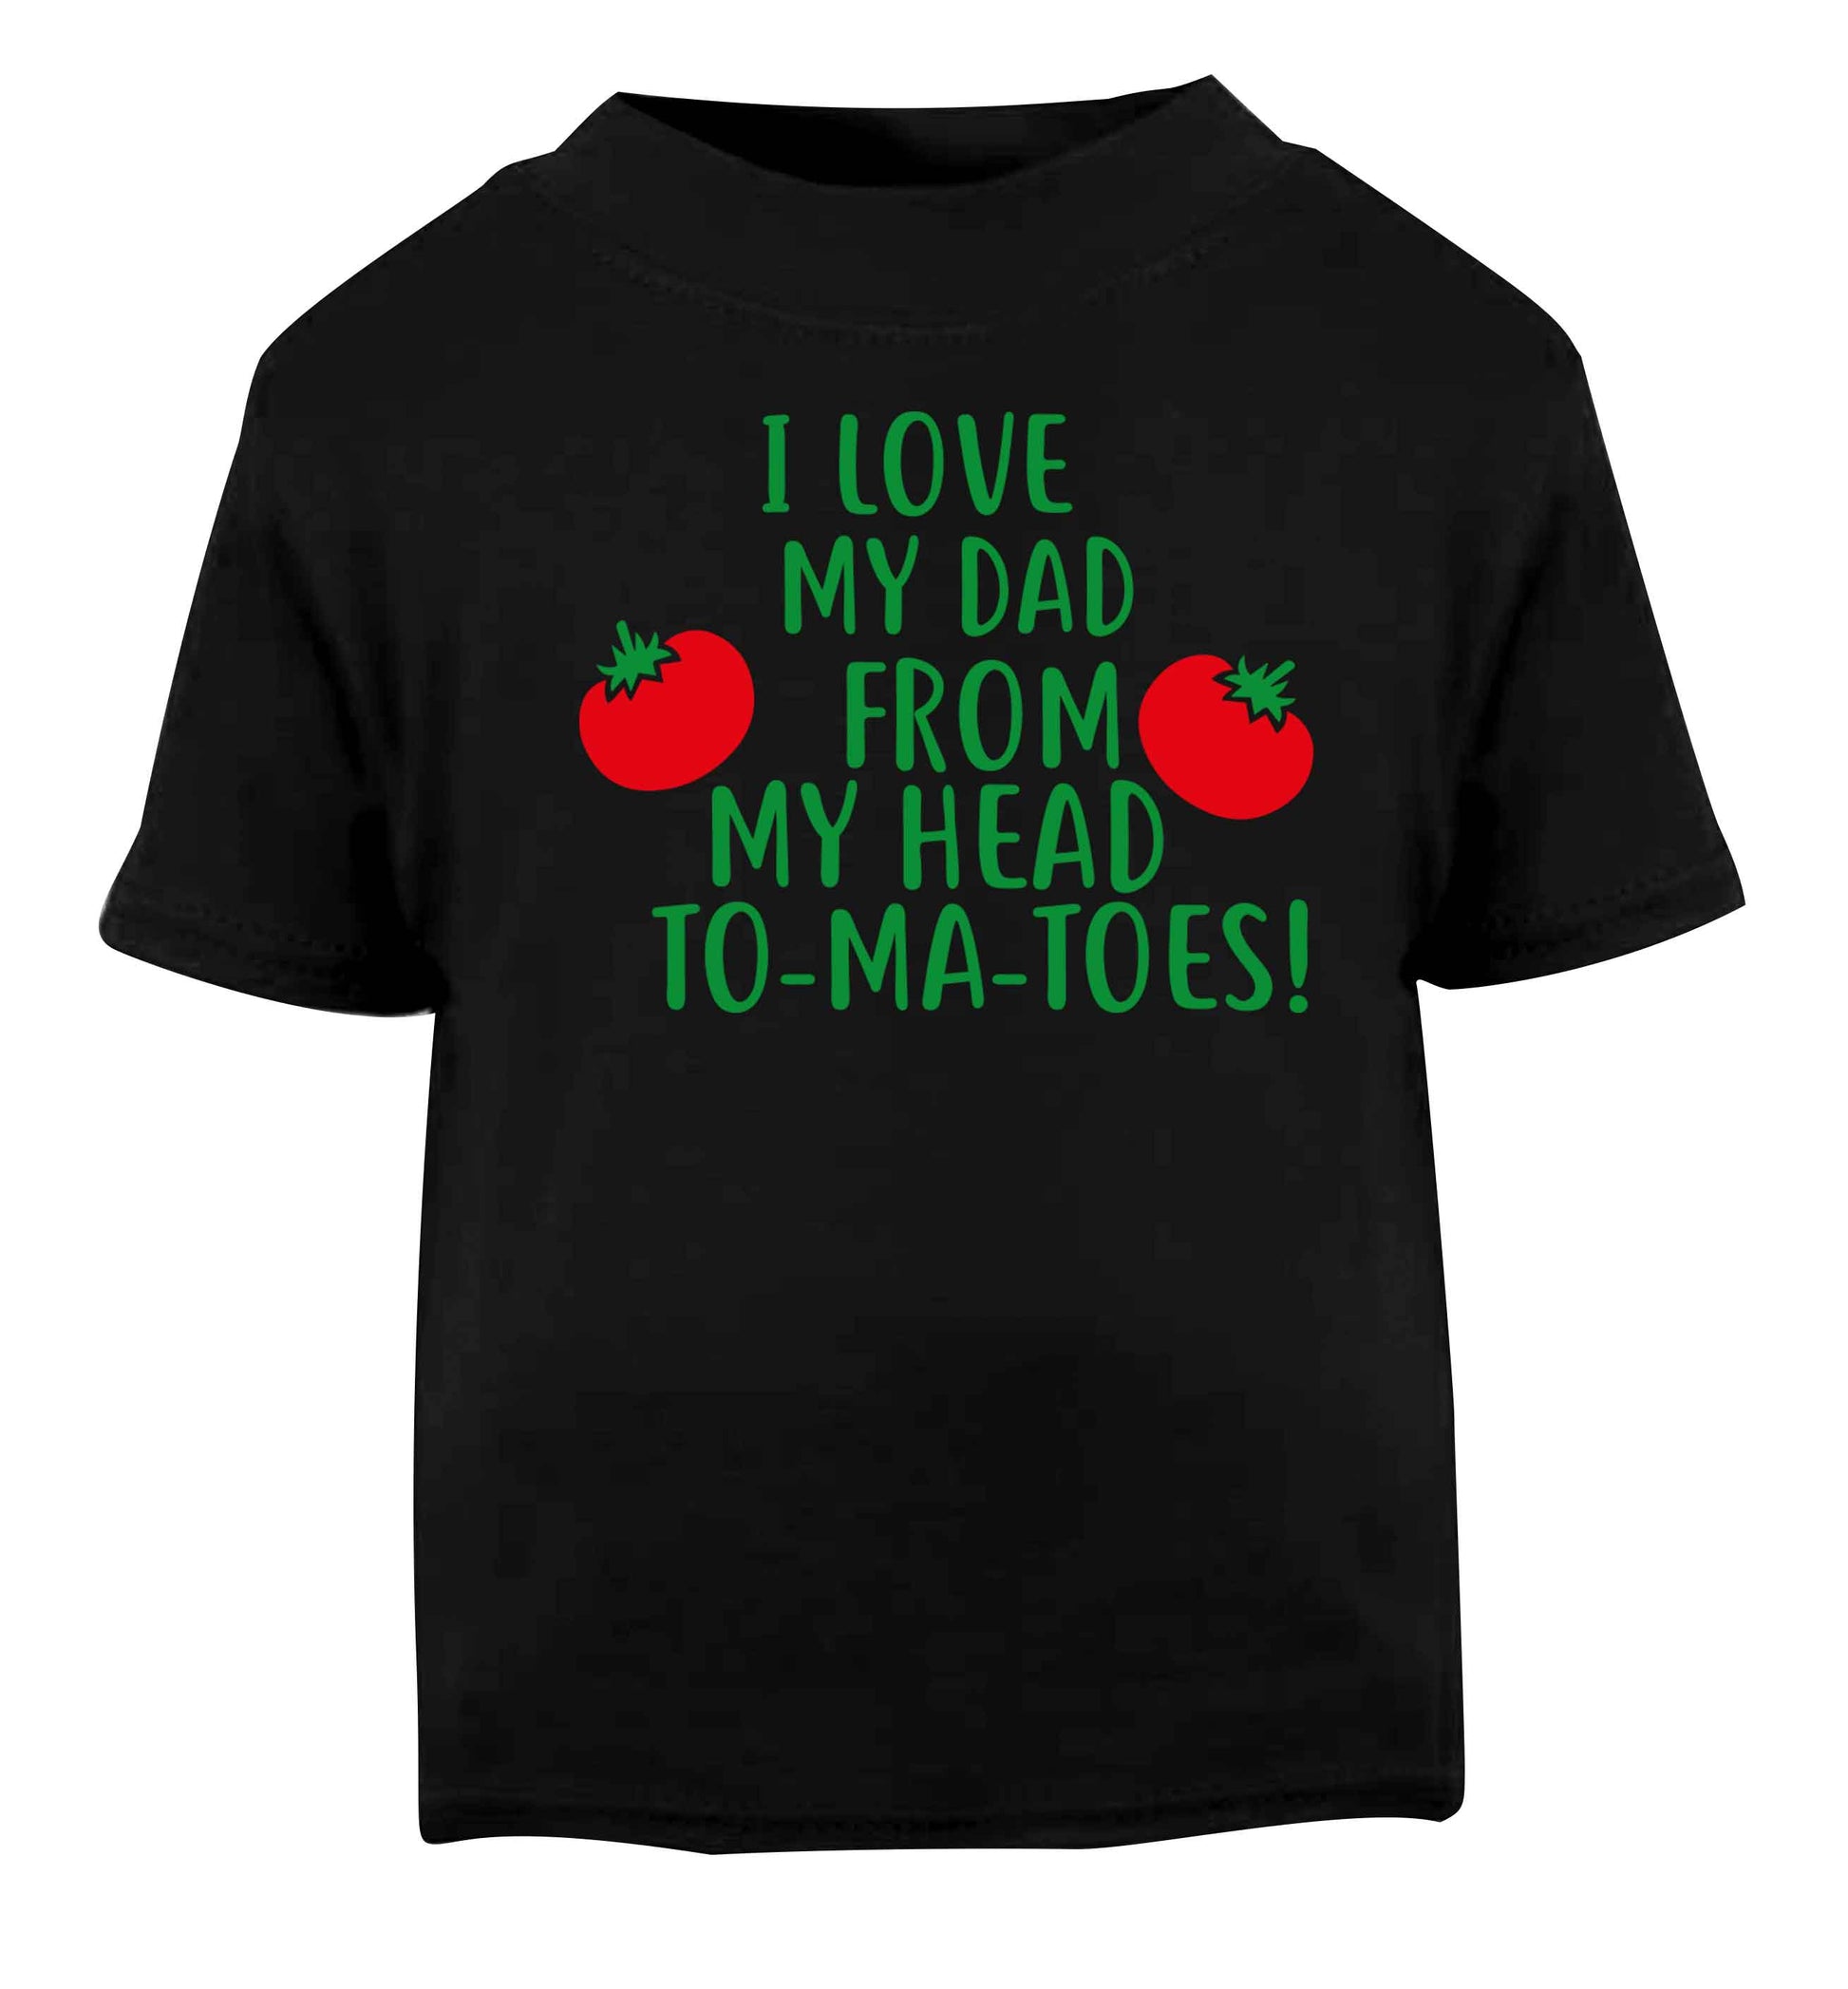 I love my dad from my head to-ma-toes Black baby toddler Tshirt 2 years